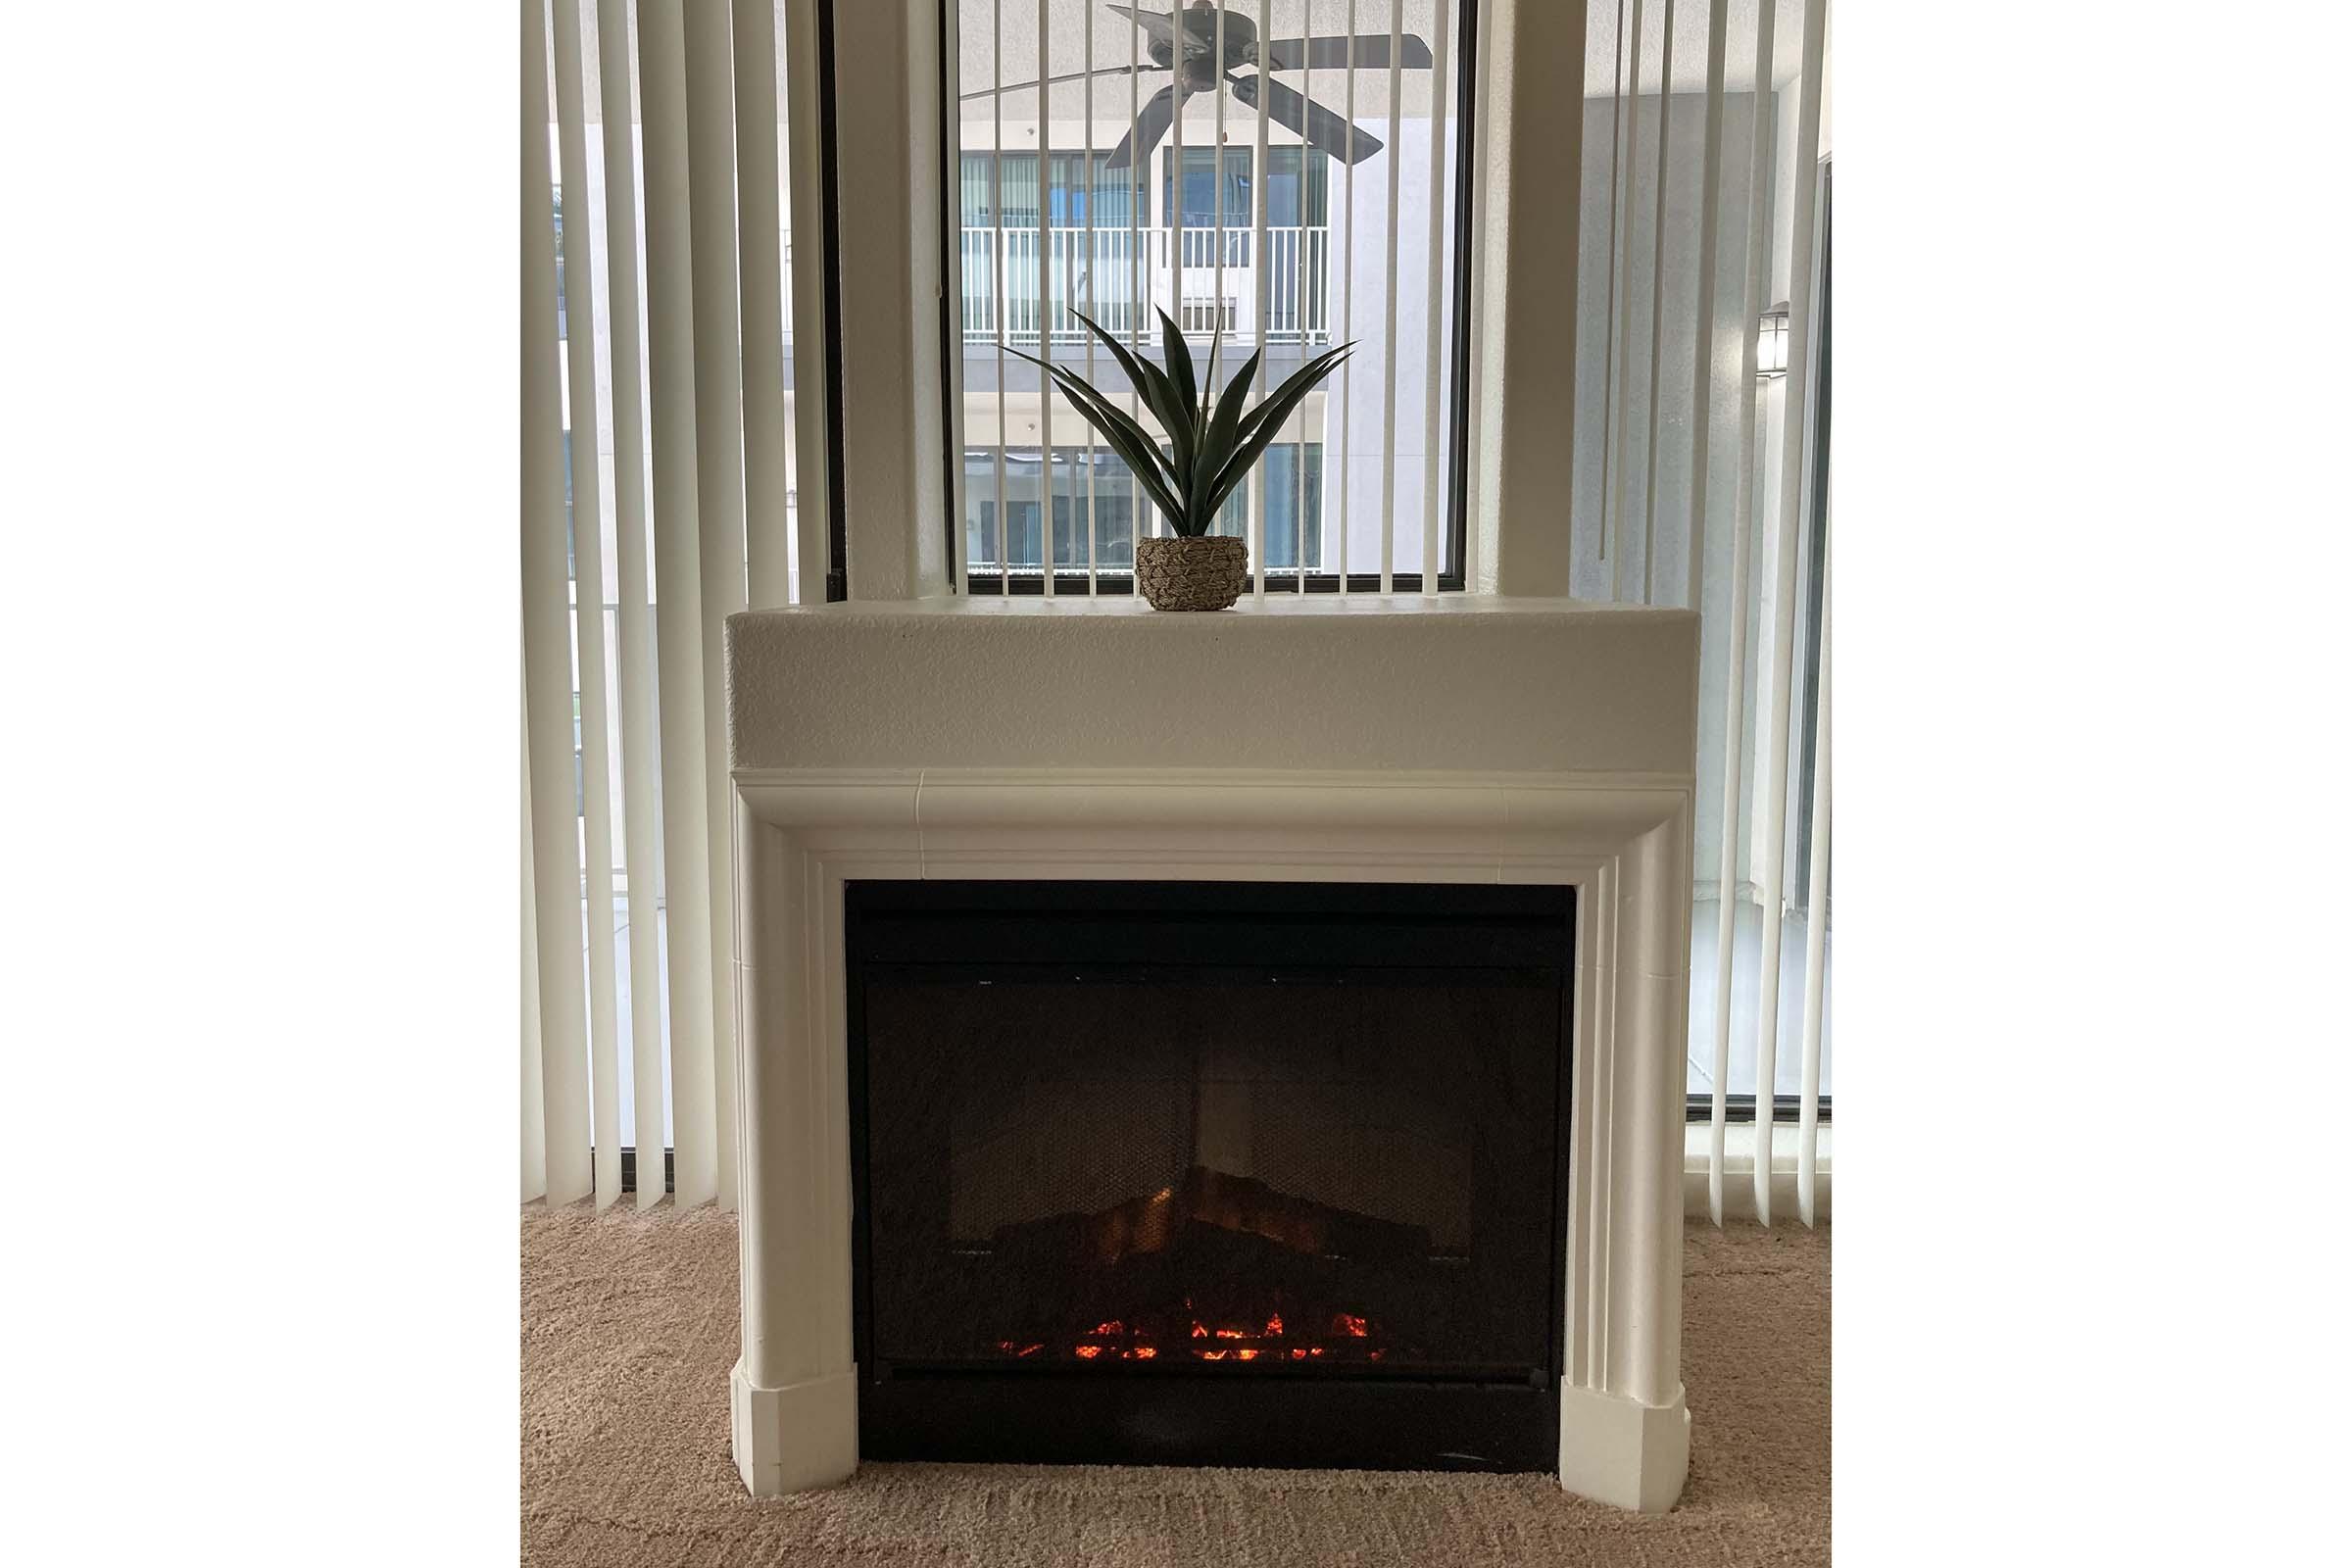 a fire place sitting in a window